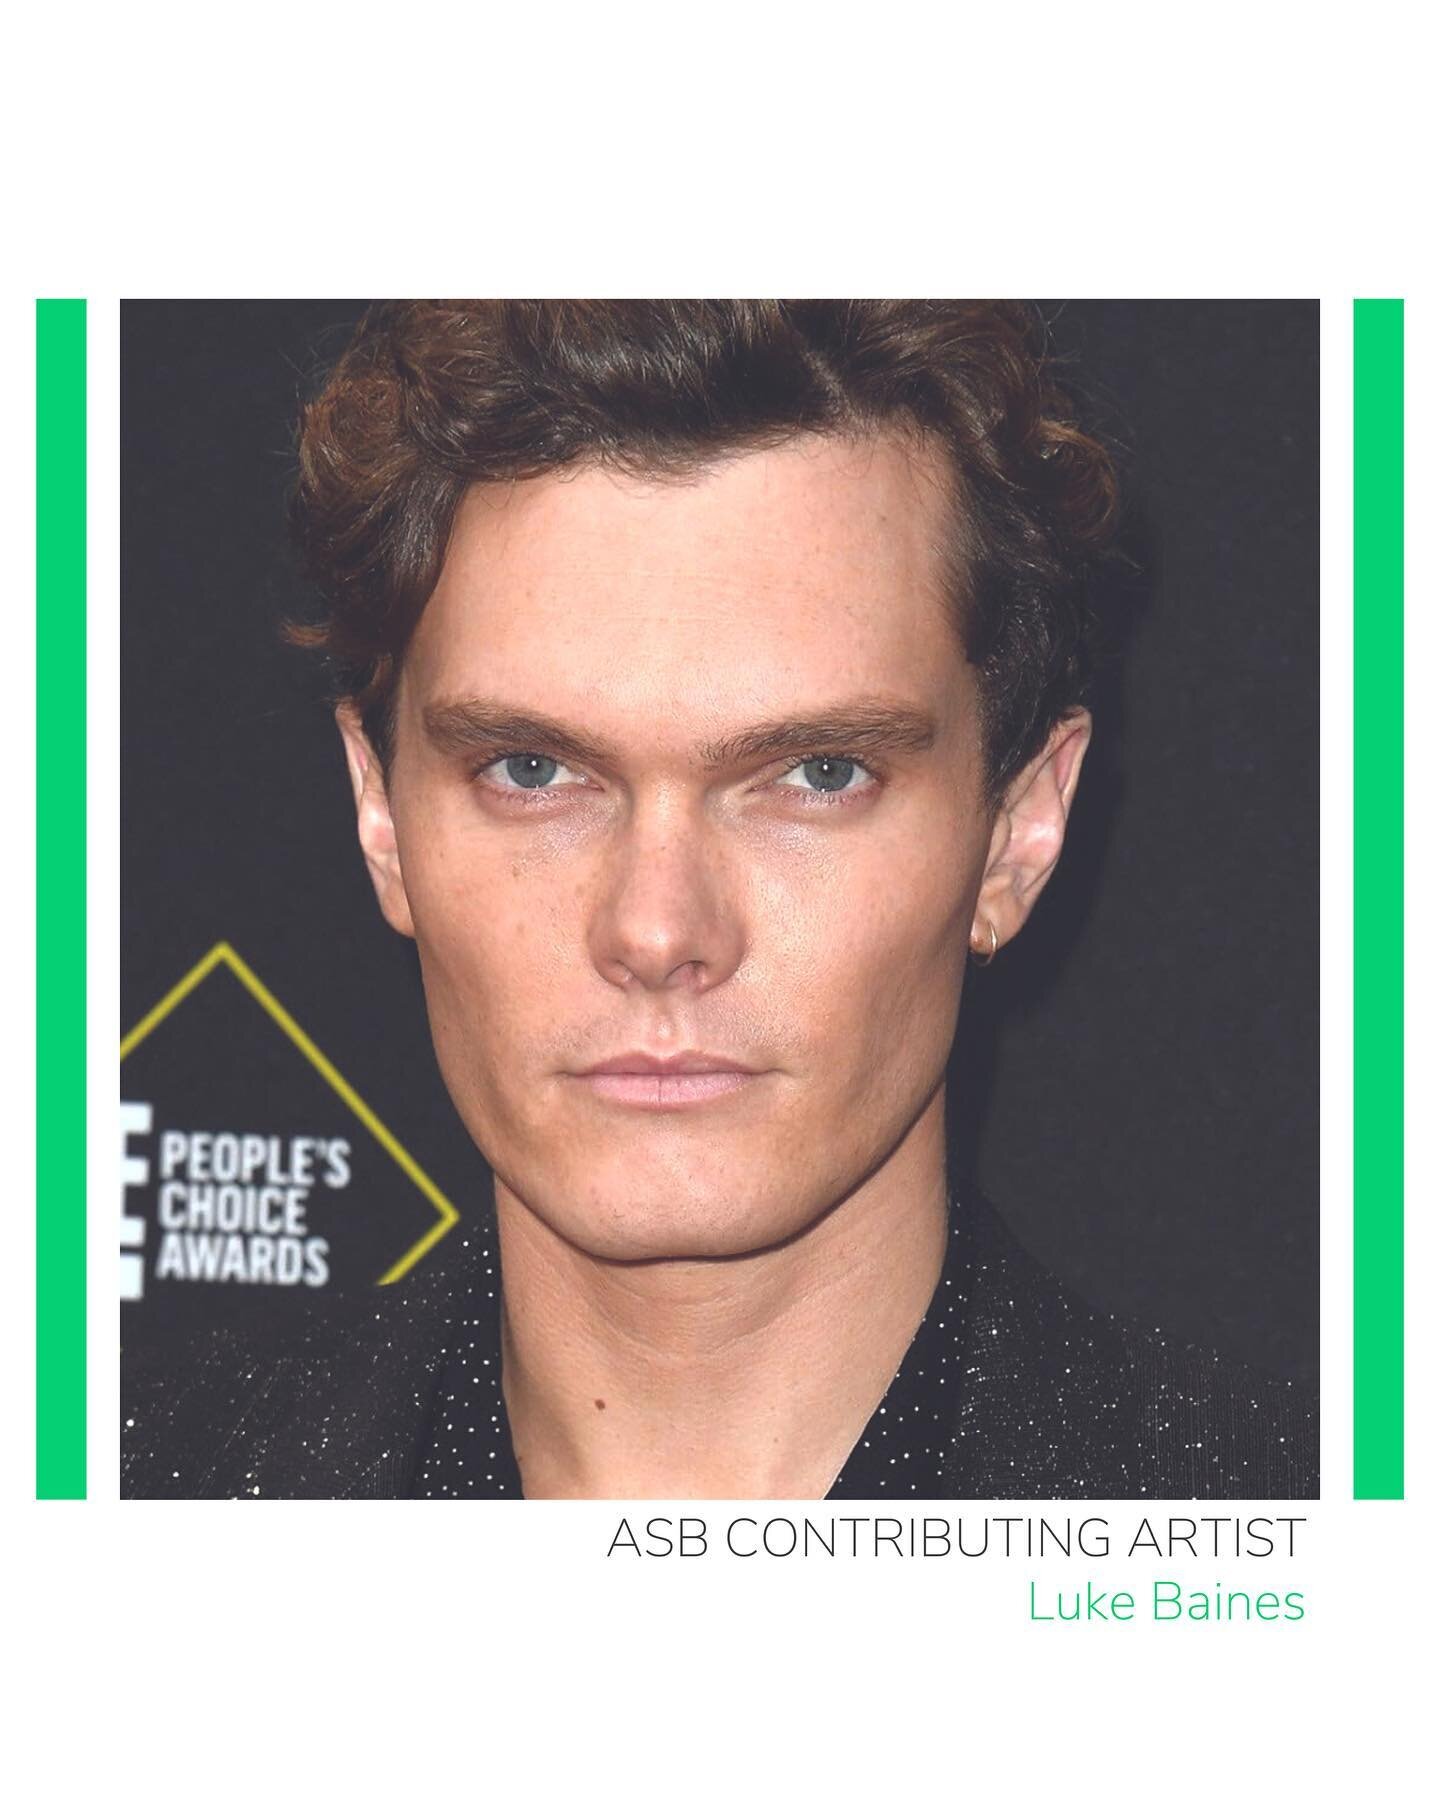 We are enormously grateful to @lukebaines for so generously contributing an awesome drawing to our therapeutic art programmes.

Luke Baines is an English-born Australian actor. He is best known for playing the serial killer in &ldquo;The Girl in the 